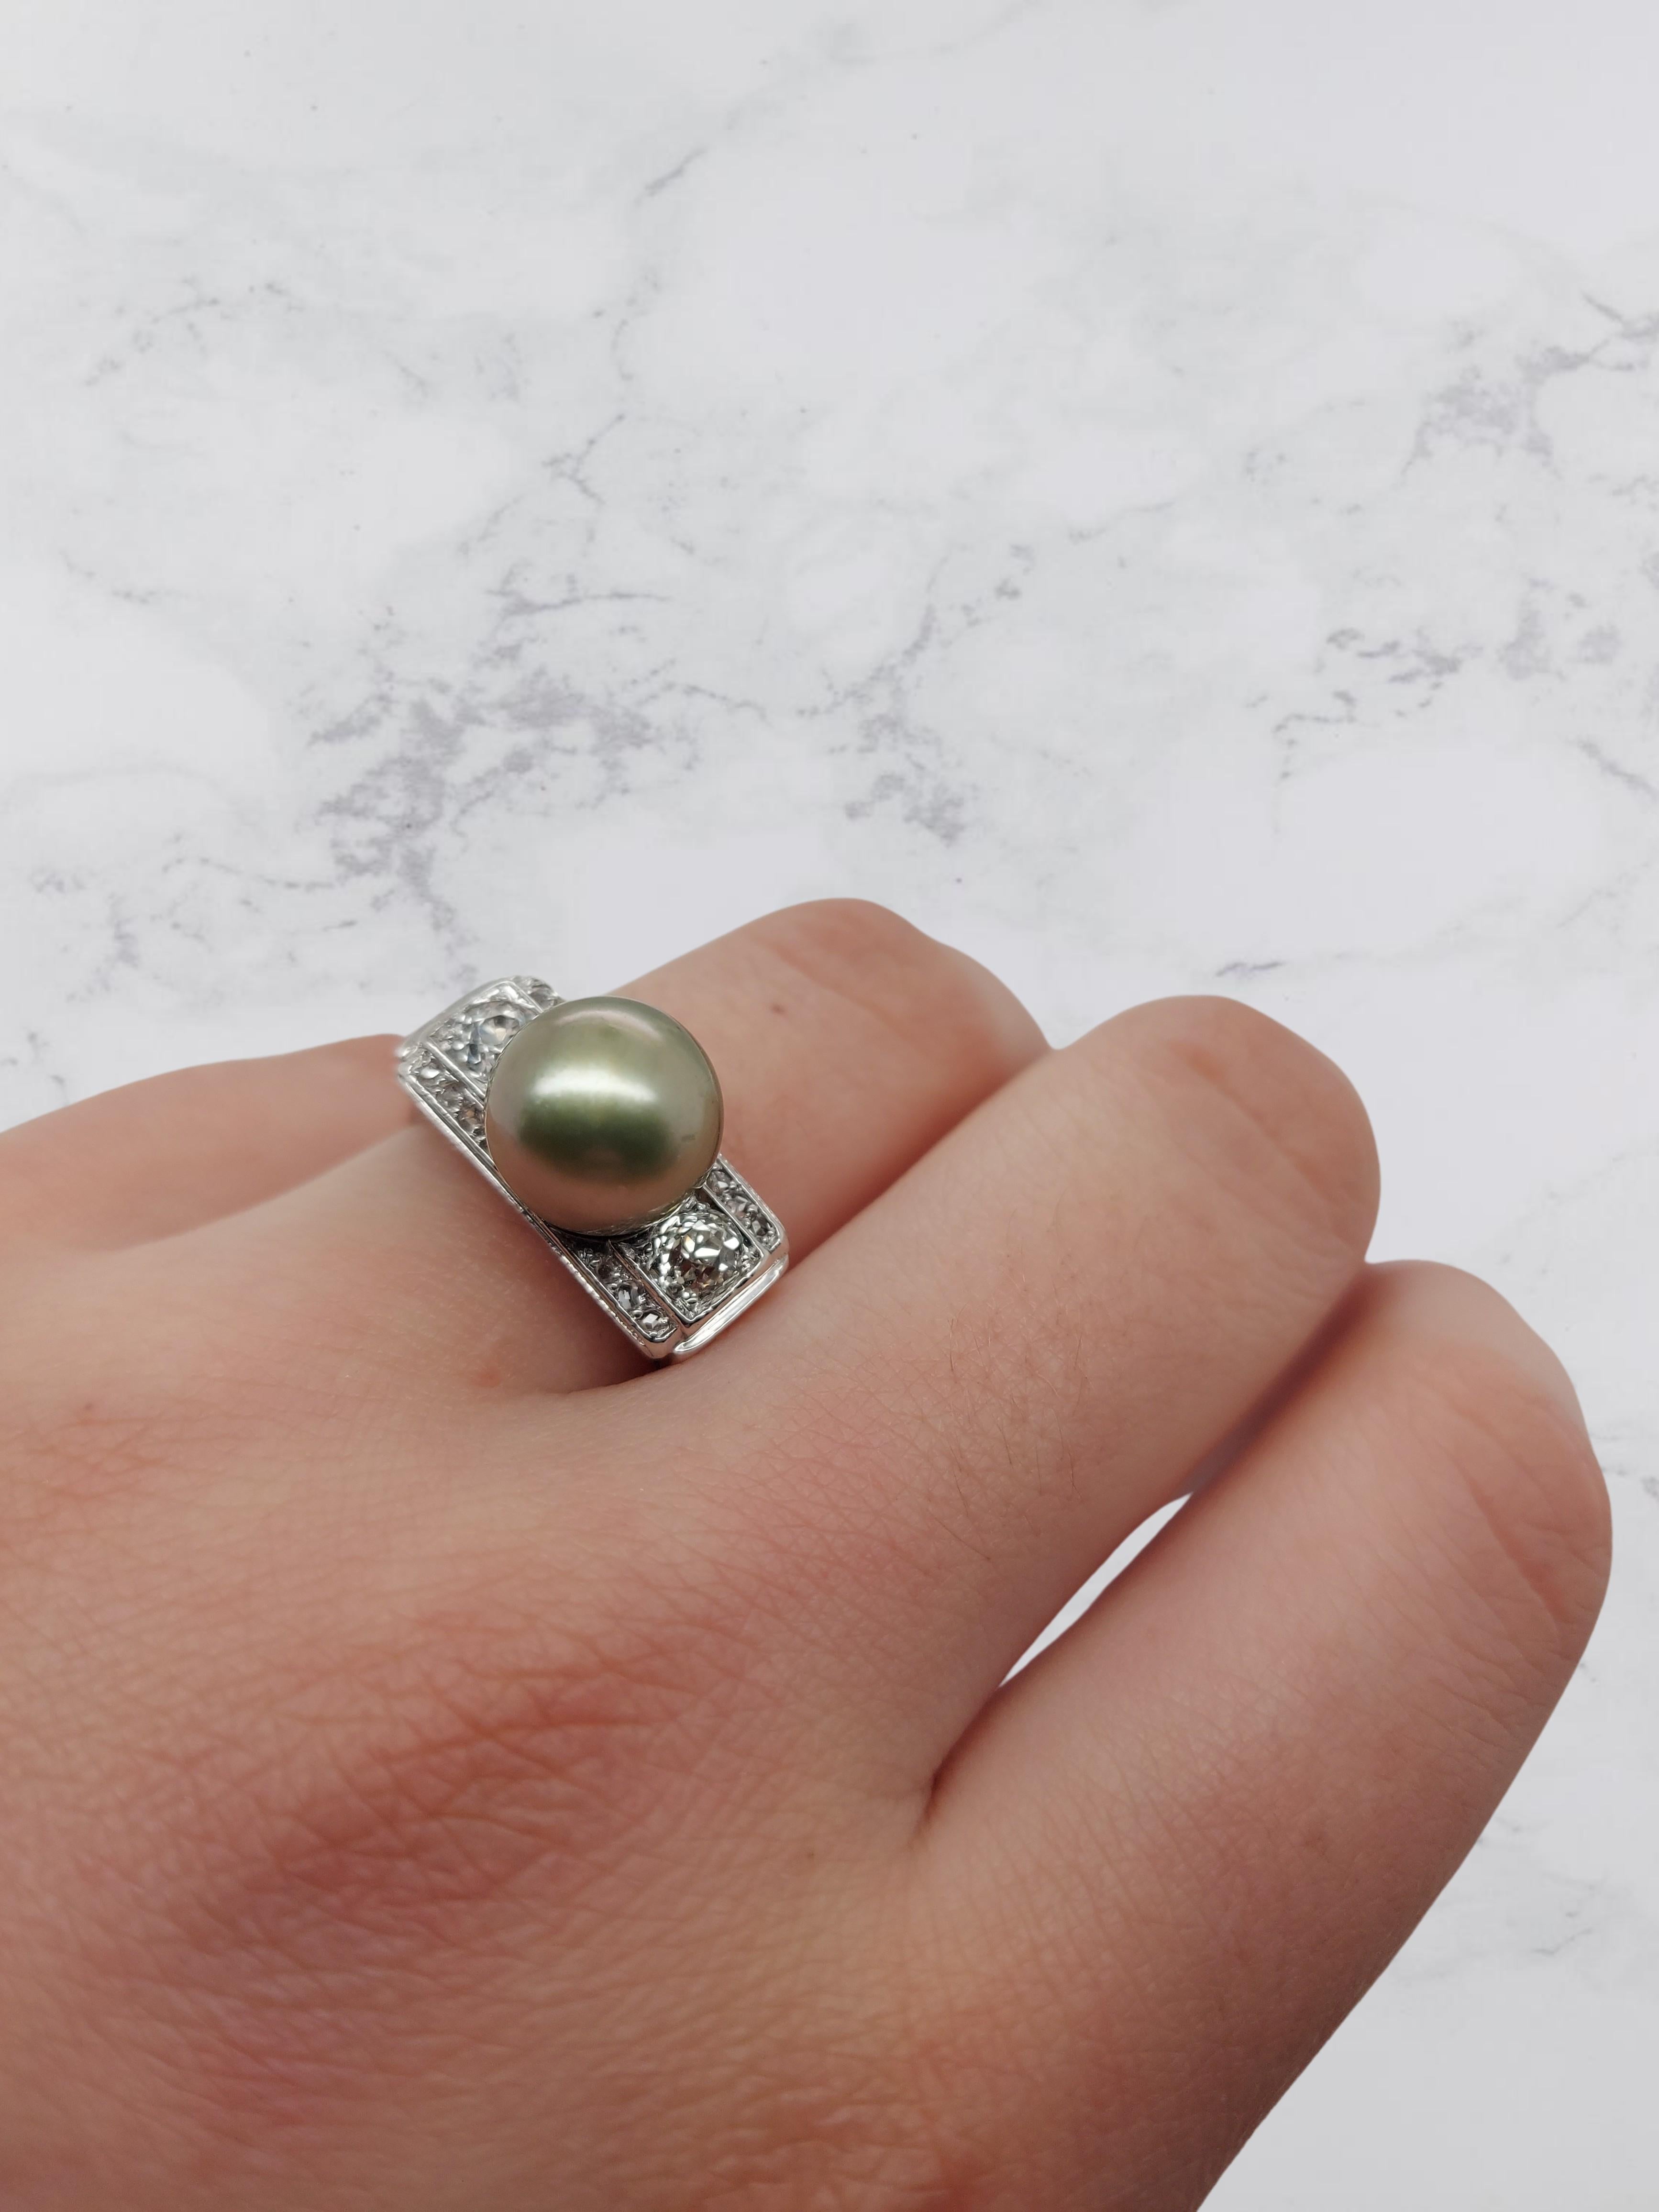 18kt White Gold Ring with Green Tahiti Pearl and 0.5ct Old Mine Cut Diamonds 4